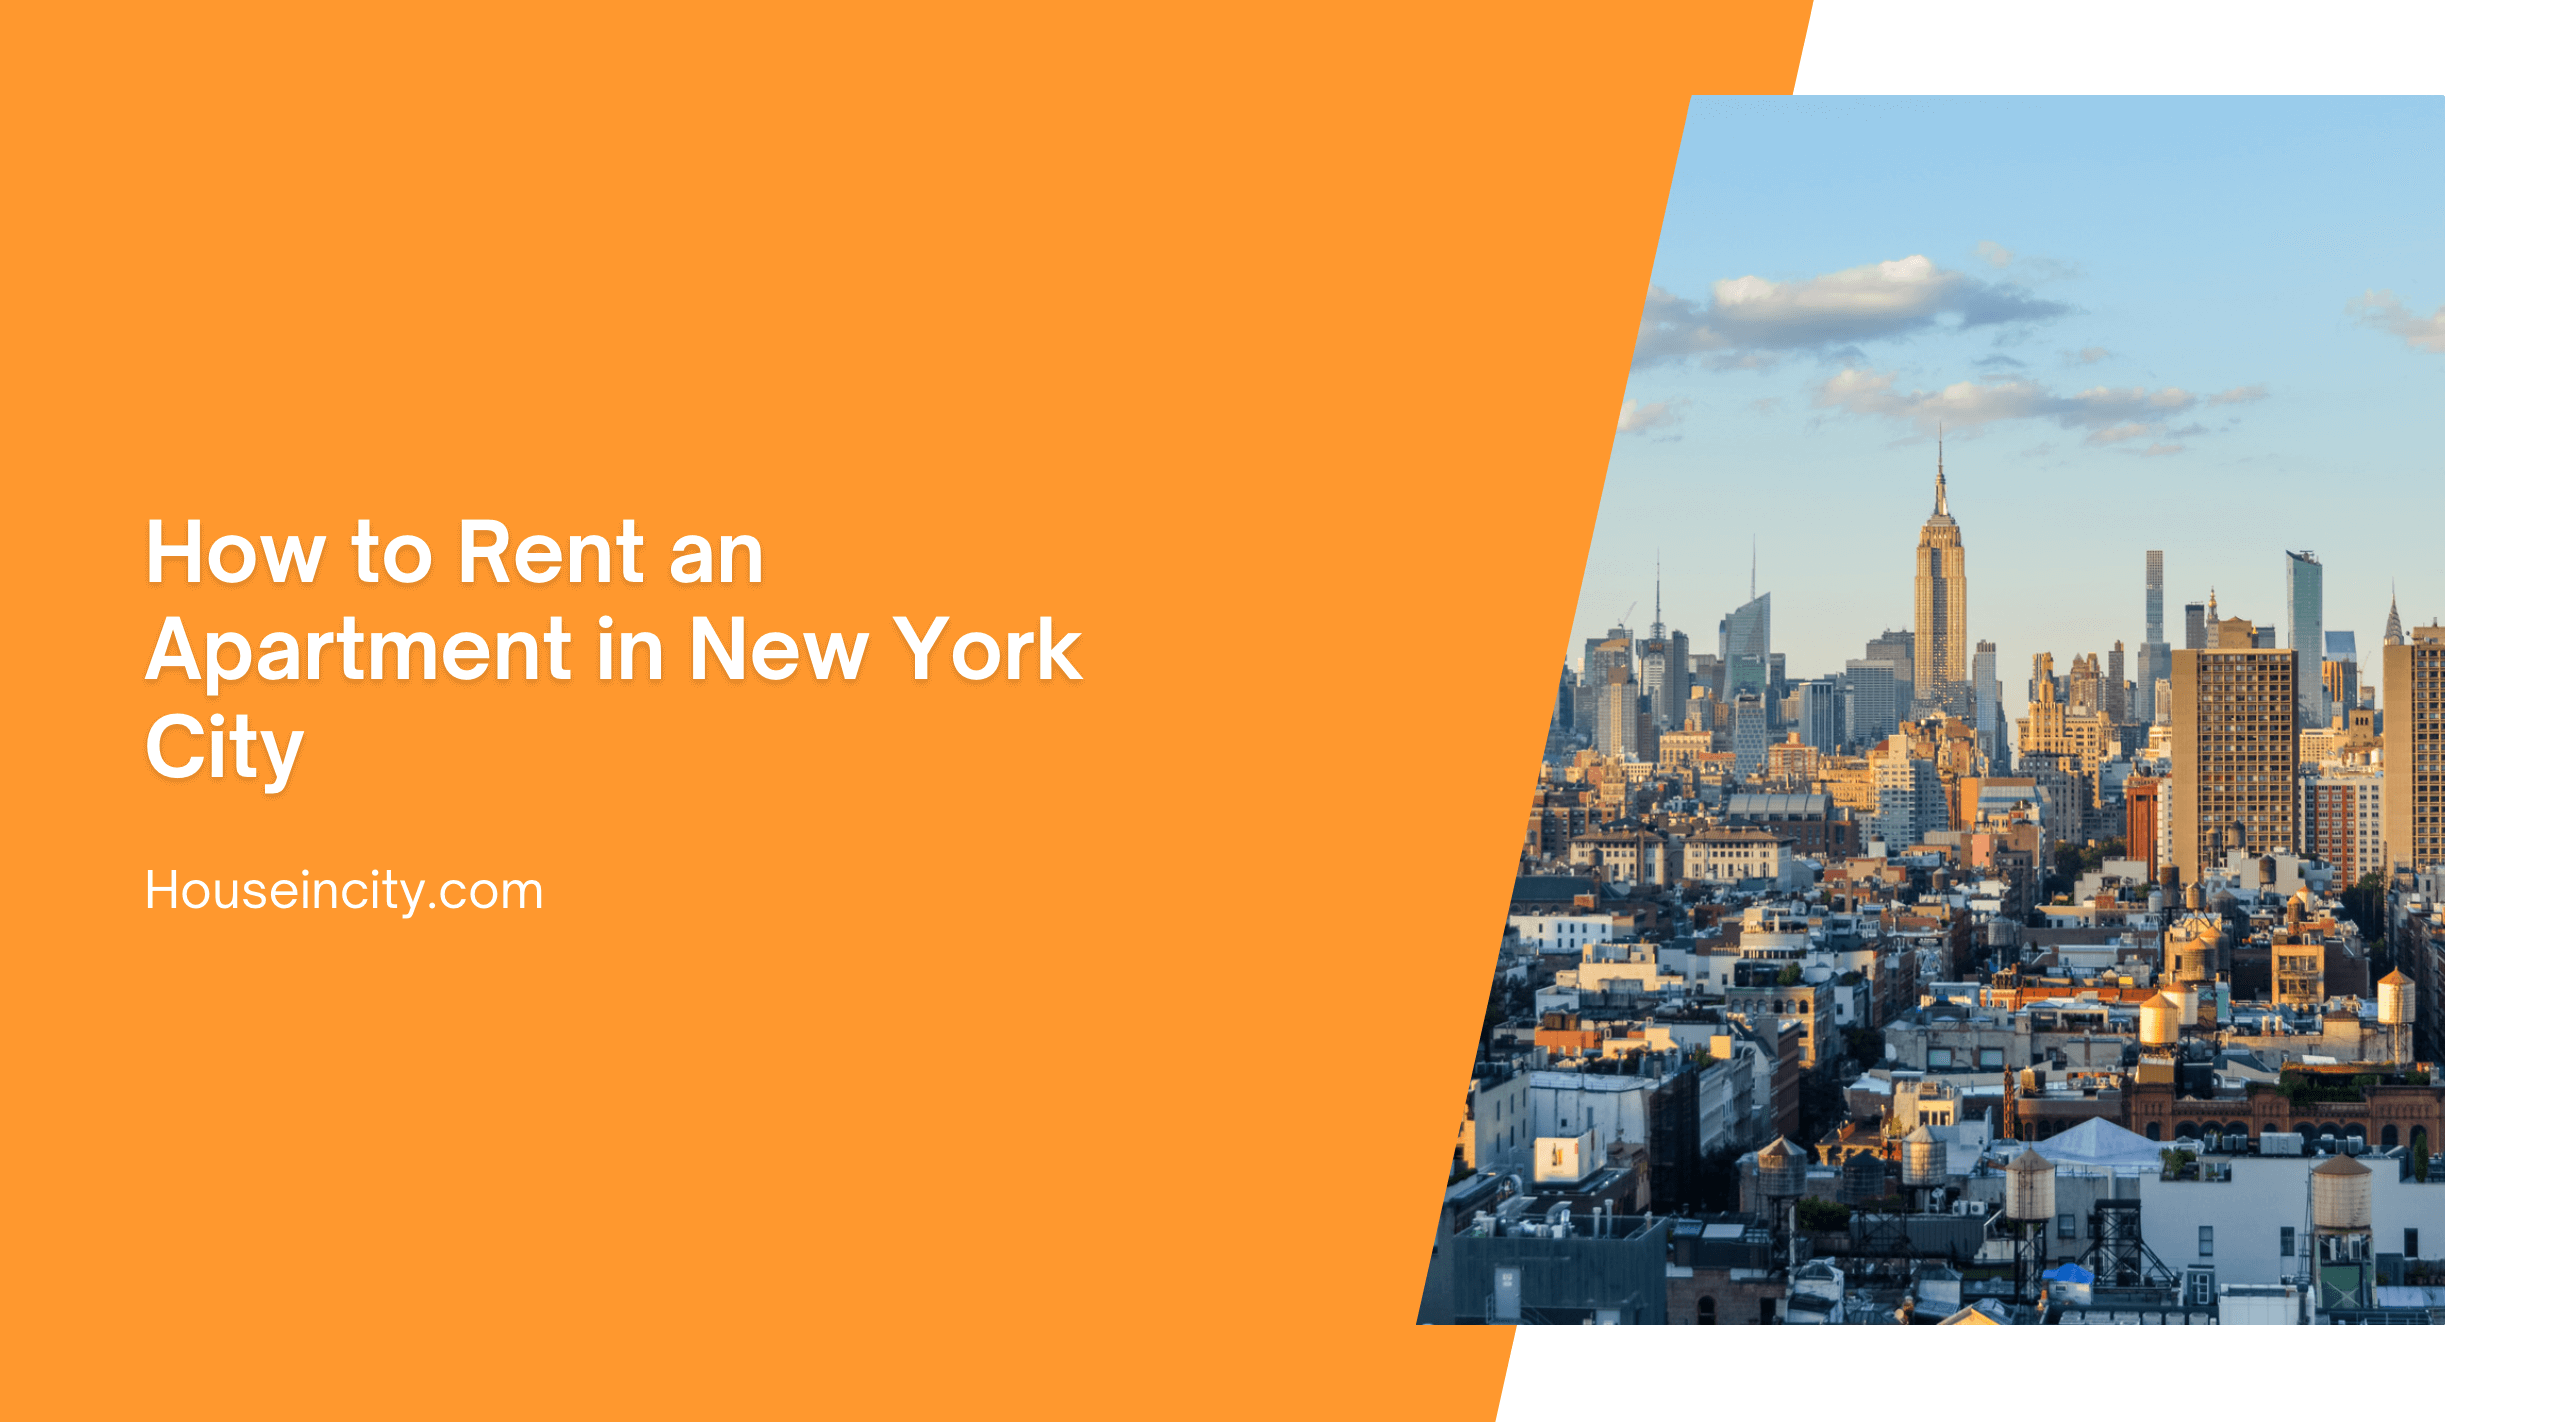 How to Rent an Apartment in New York City